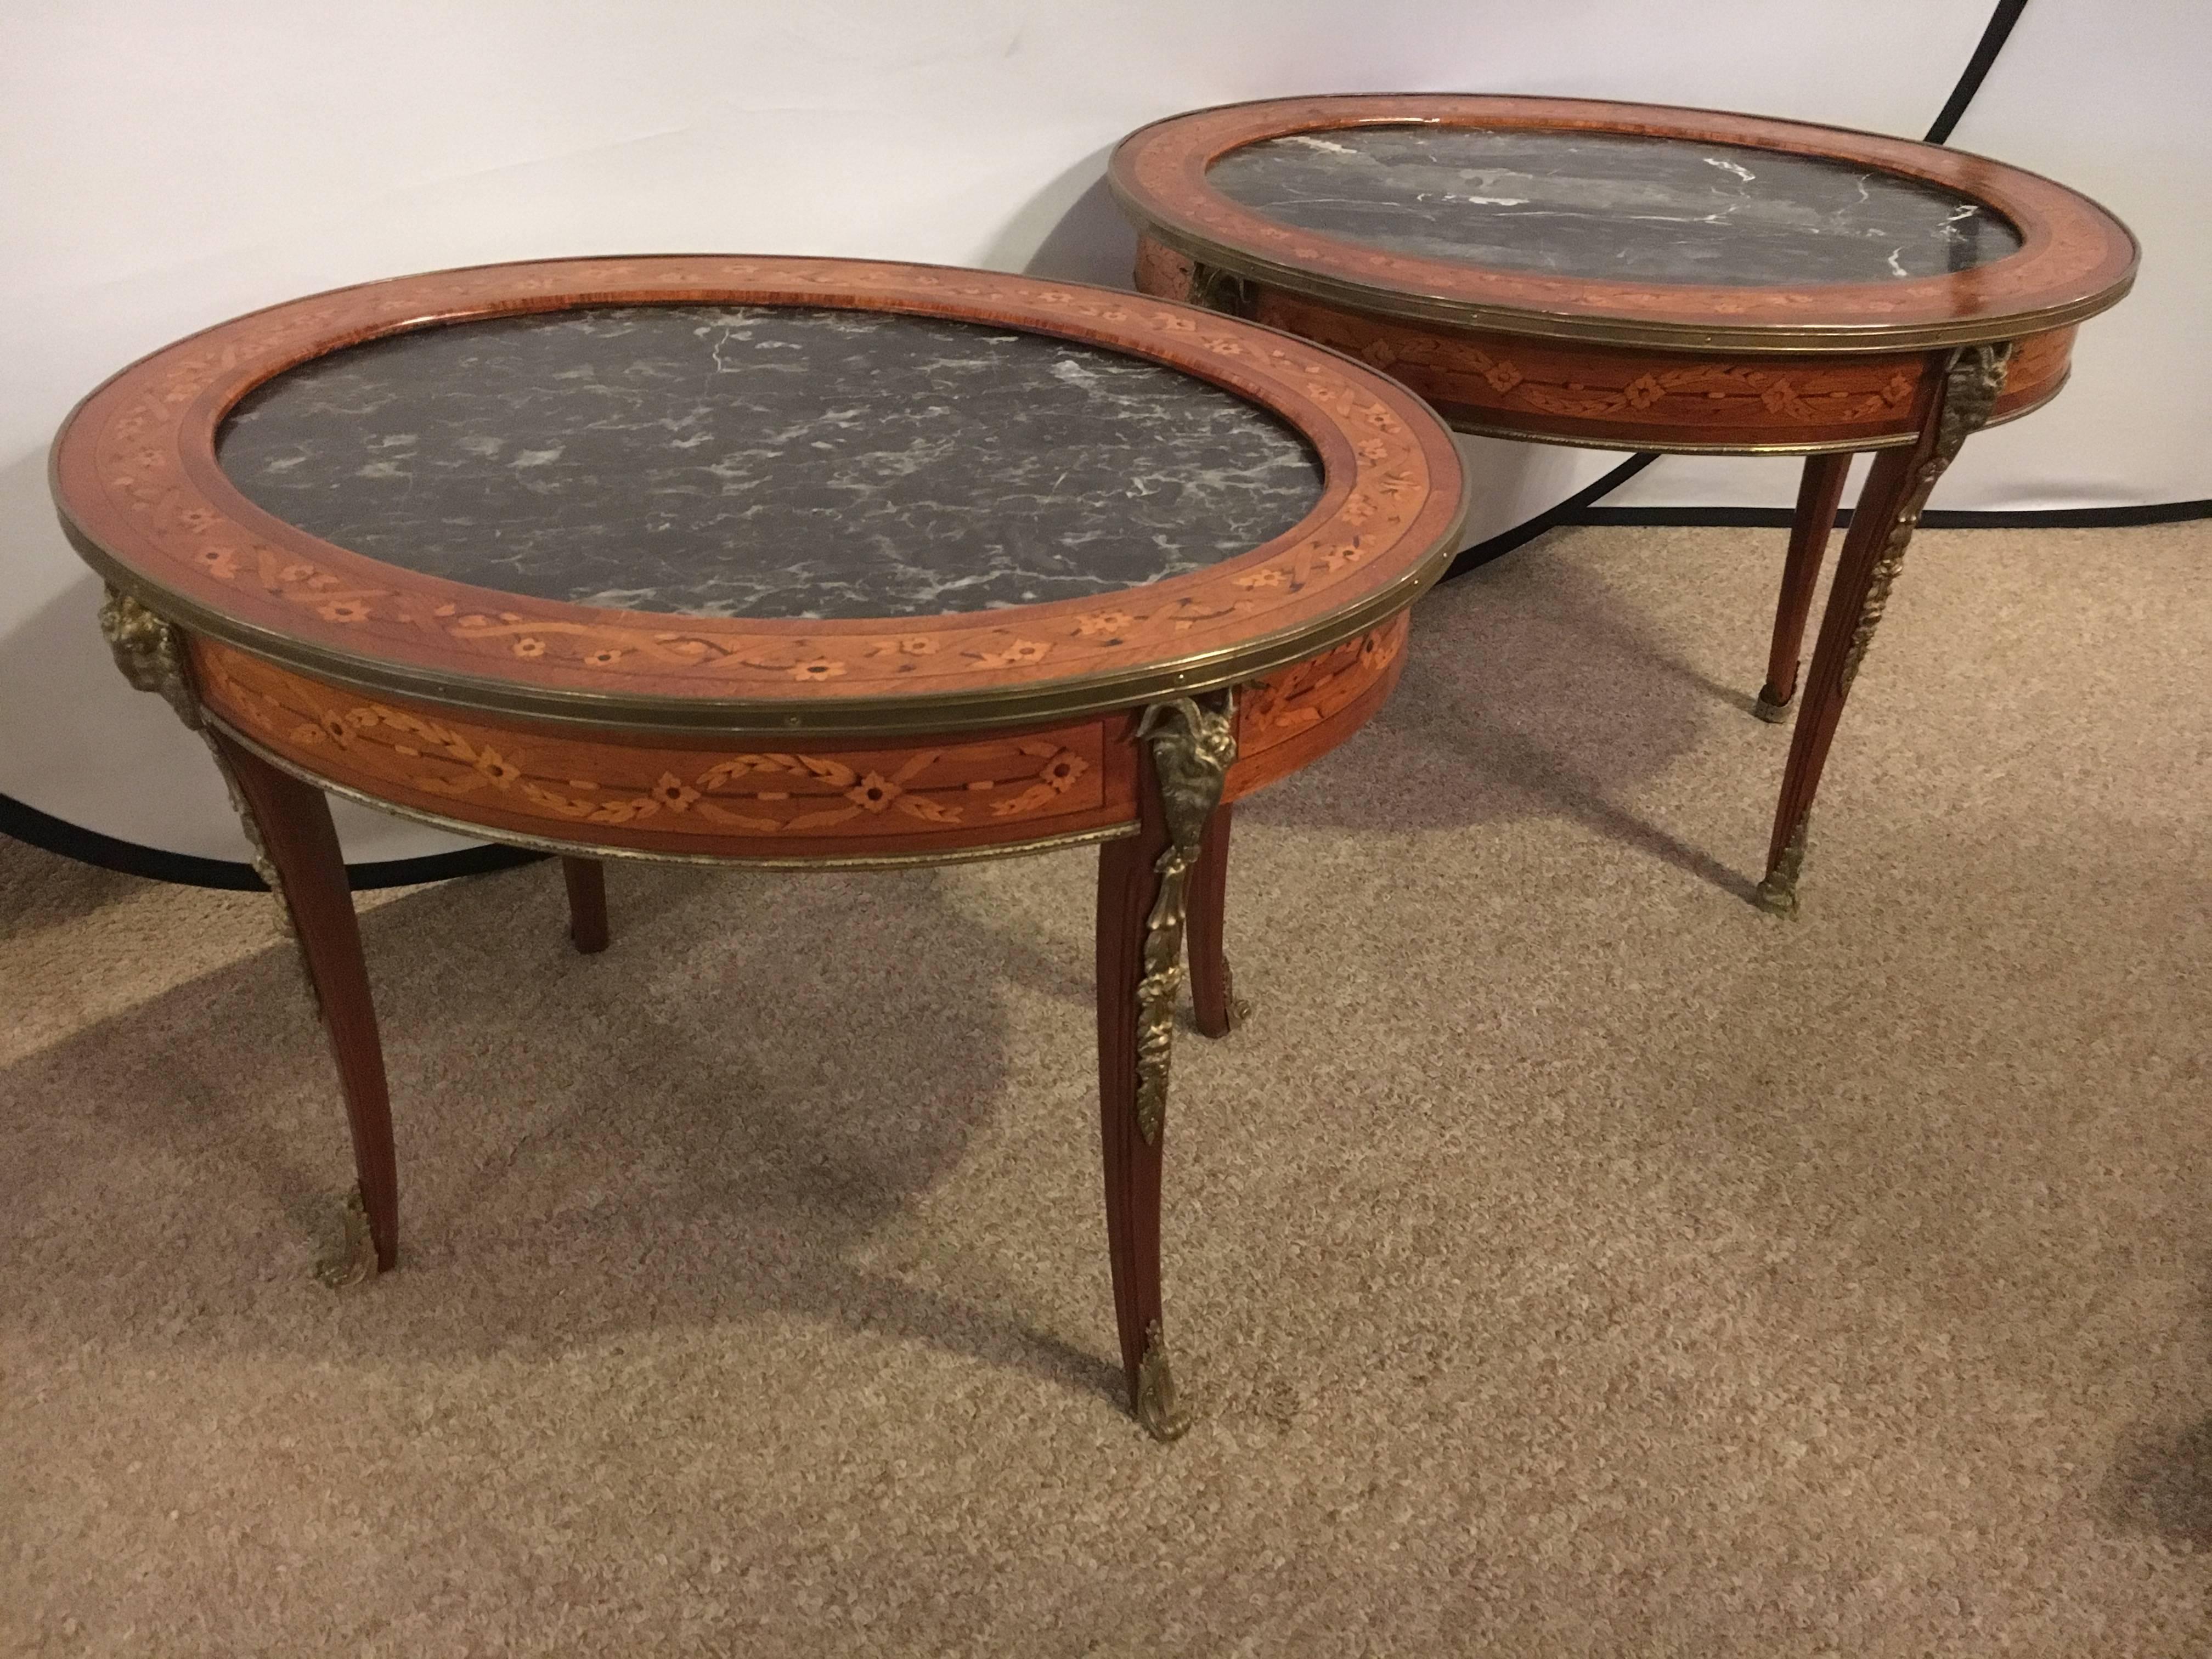 Marble-top bronze-mounted low/coffee table. The bronze claw feet leading to a curved leg terminating in a ram's head with flowing leaf design. The top, finely inlaid with a marble set into the center. The overall top with a bronze border. Inlaid